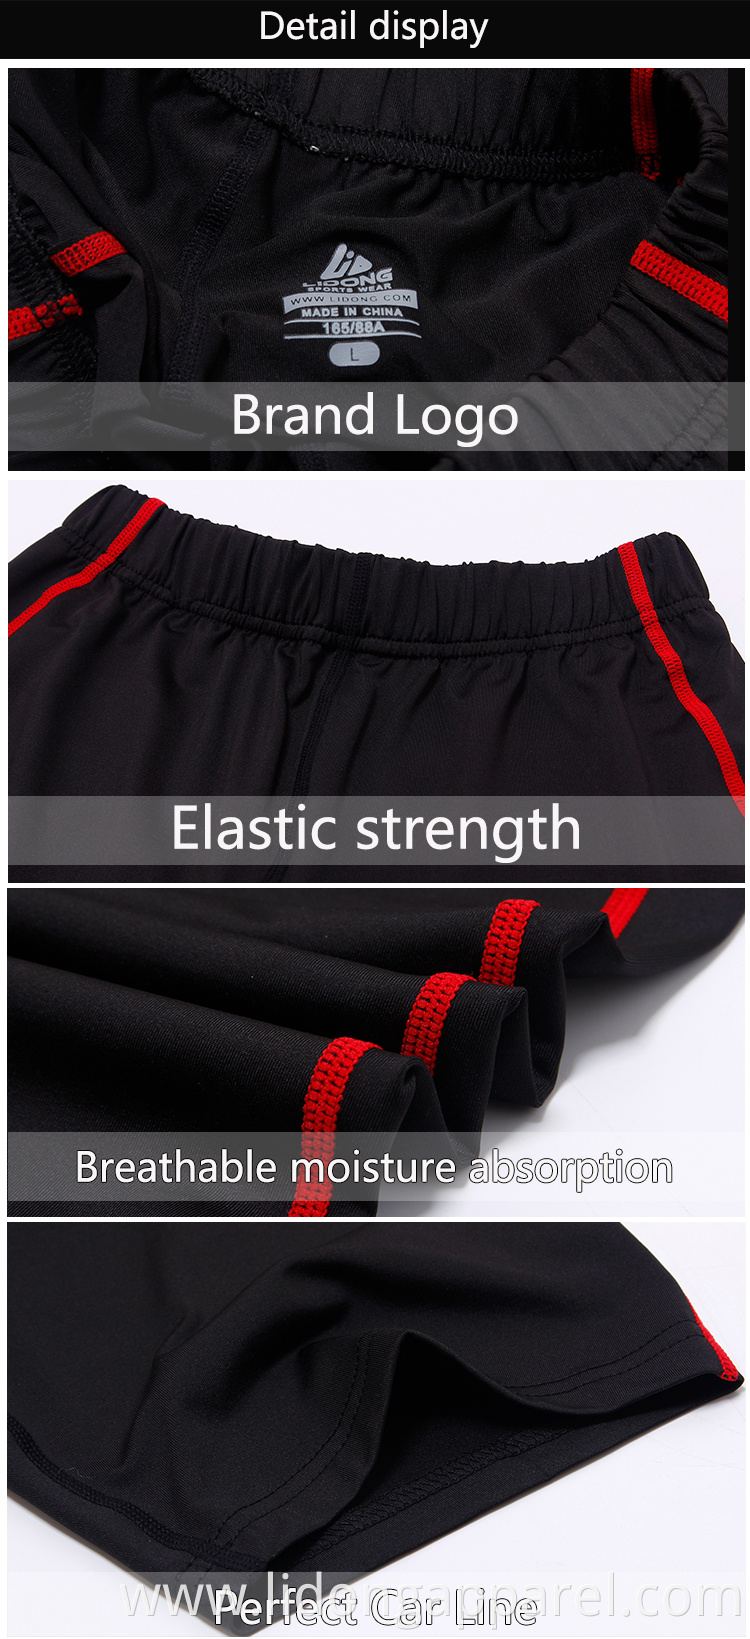 wholesale 17new style men fitness tight gym shorts